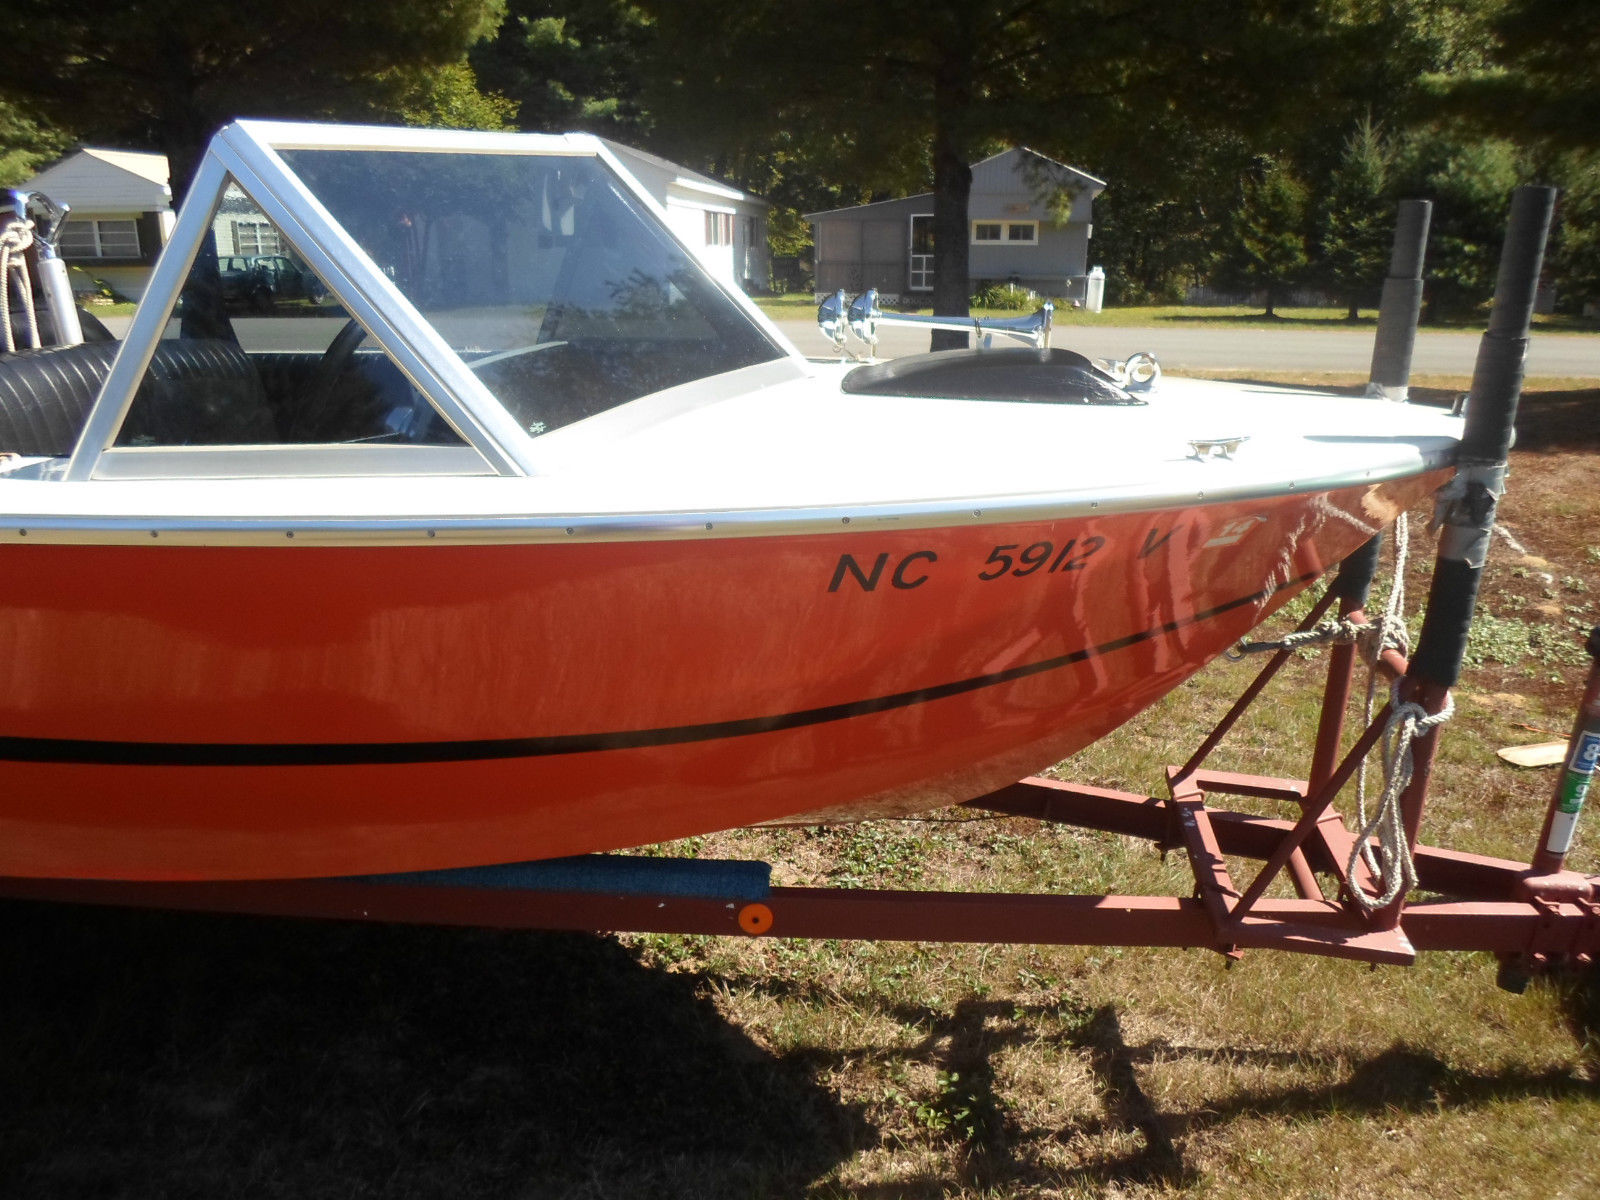 Correct Craft Mustang 1973 for sale for $5,600 - Boats ...